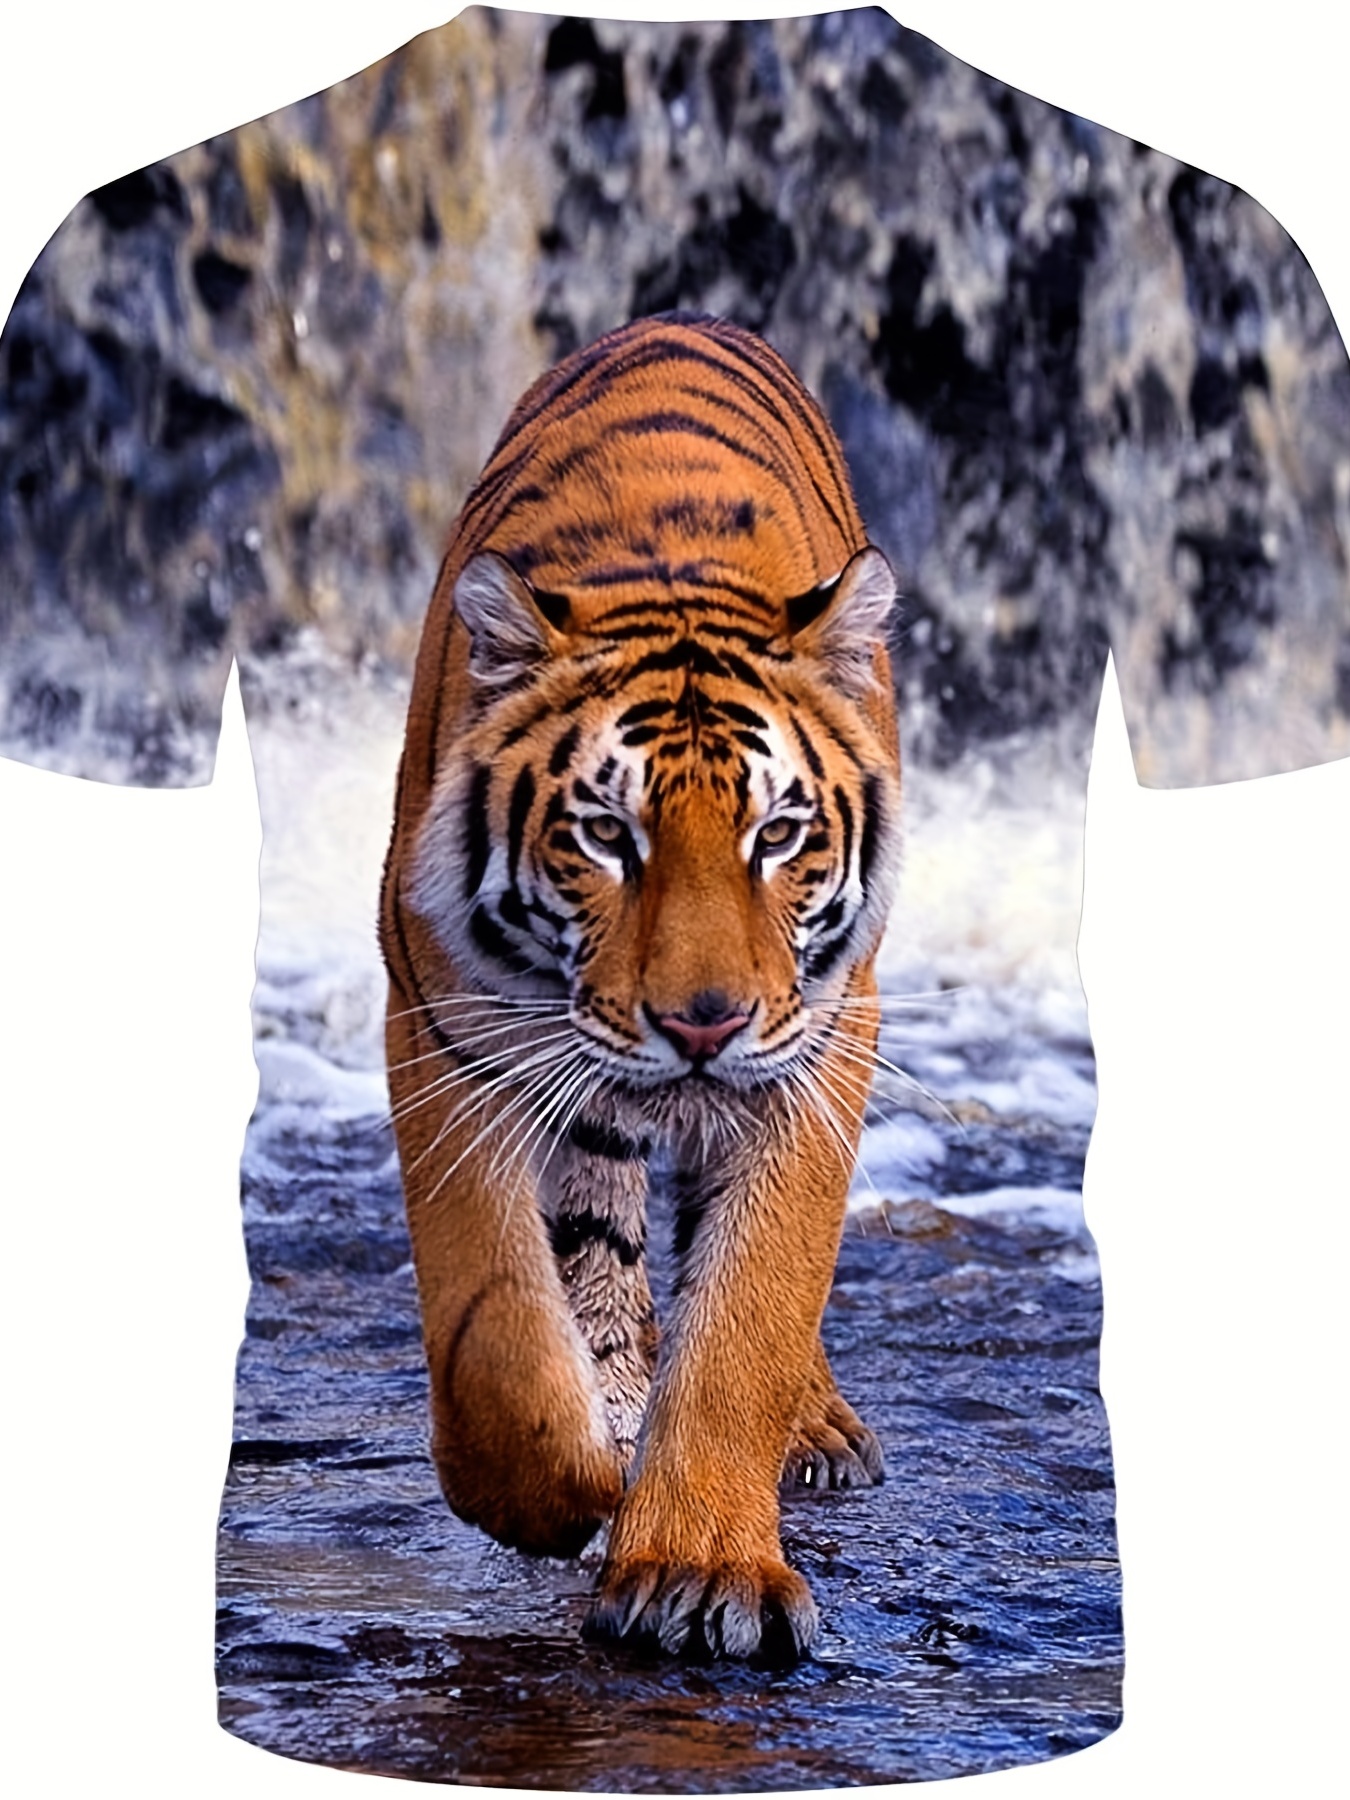 Man Summer Shirt 3d Print Tiger T-shirts Clothes Casual Tees For Men's  Fashion Streetwear Oversized O-neck Short Sleeve Tops